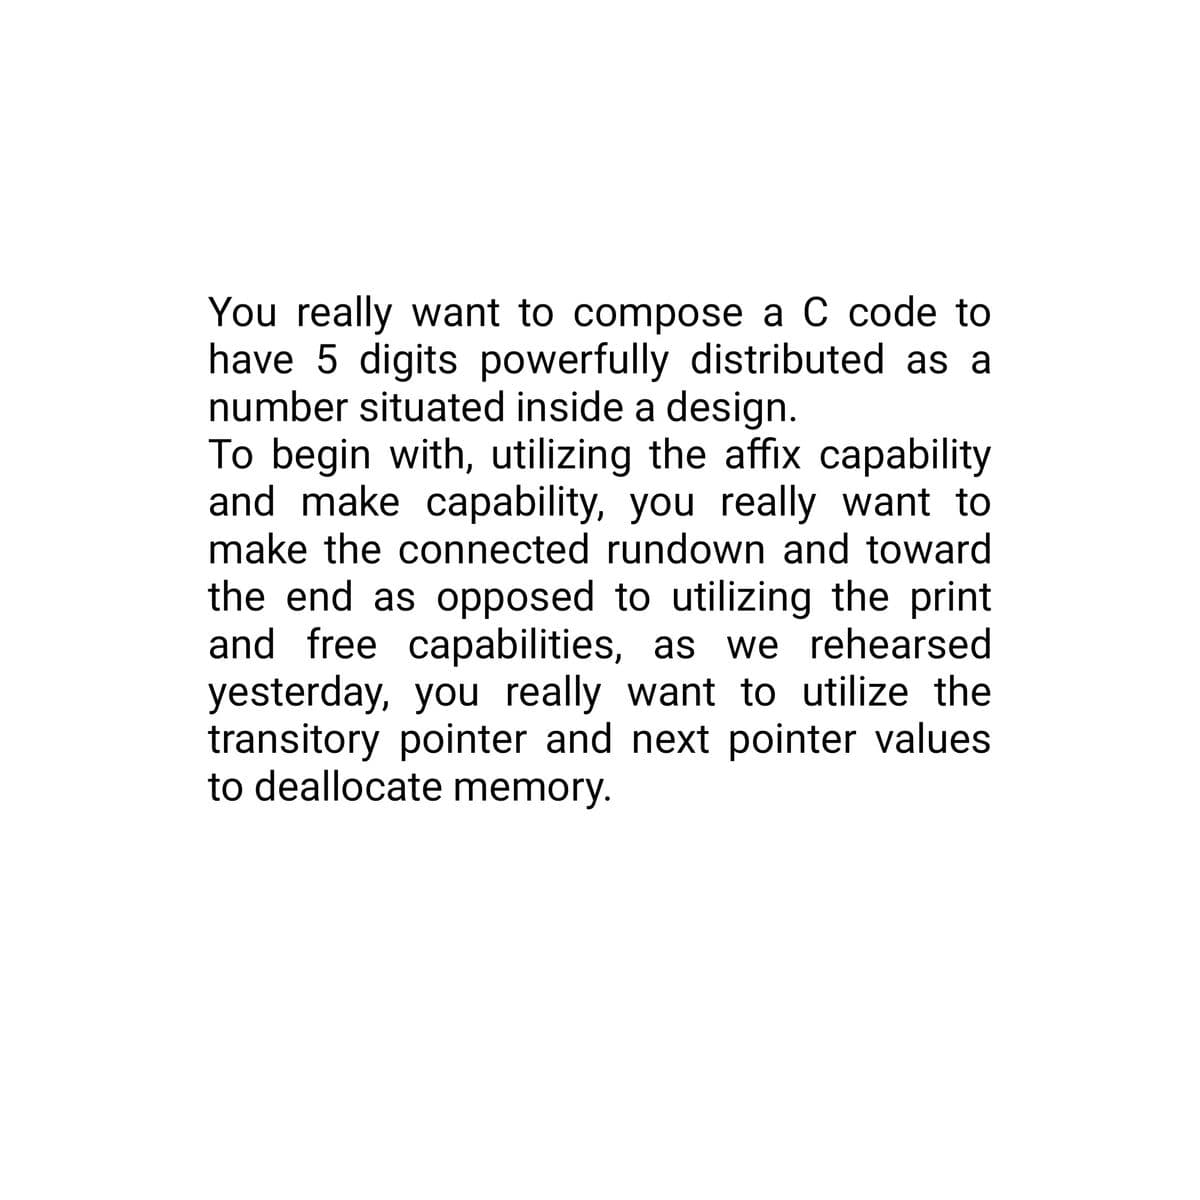 You really want to compose a C code to
have 5 digits powerfully distributed as a
number situated inside a design.
To begin with, utilizing the affix capability
and make capability, you really want to
make the connected rundown and toward
the end as opposed to utilizing the print
and free capabilities, as we rehearsed
yesterday, you really want to utilize the
transitory pointer and next pointer values
to deallocate memory.